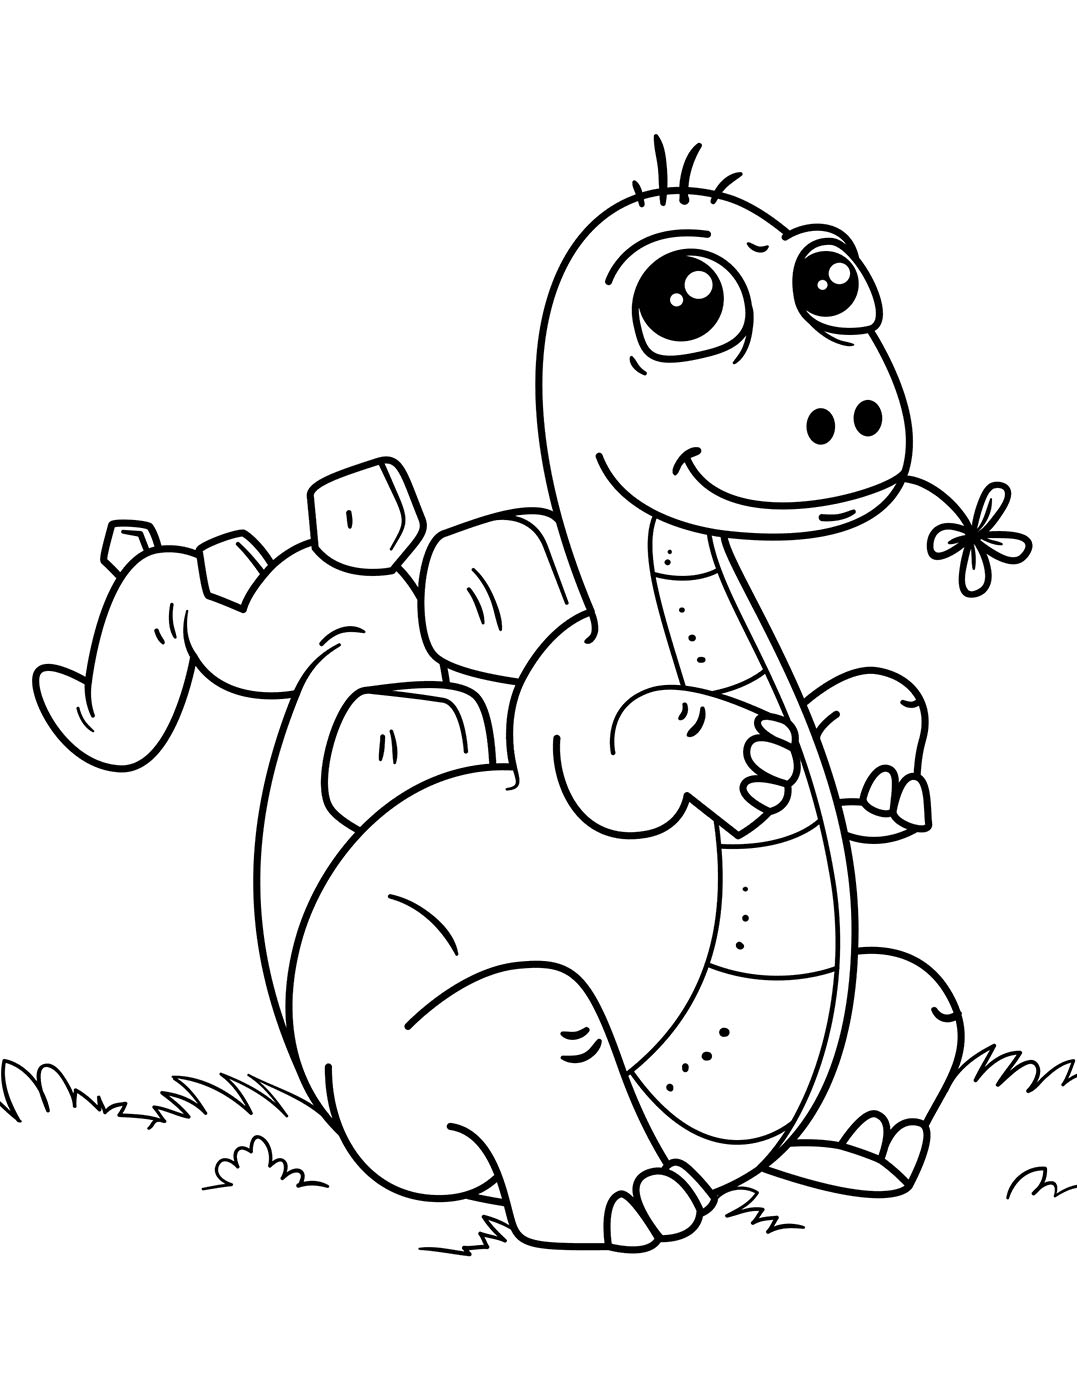 Dinosaurs to color for kids Ba Dinosaurs Kids Coloring Pages